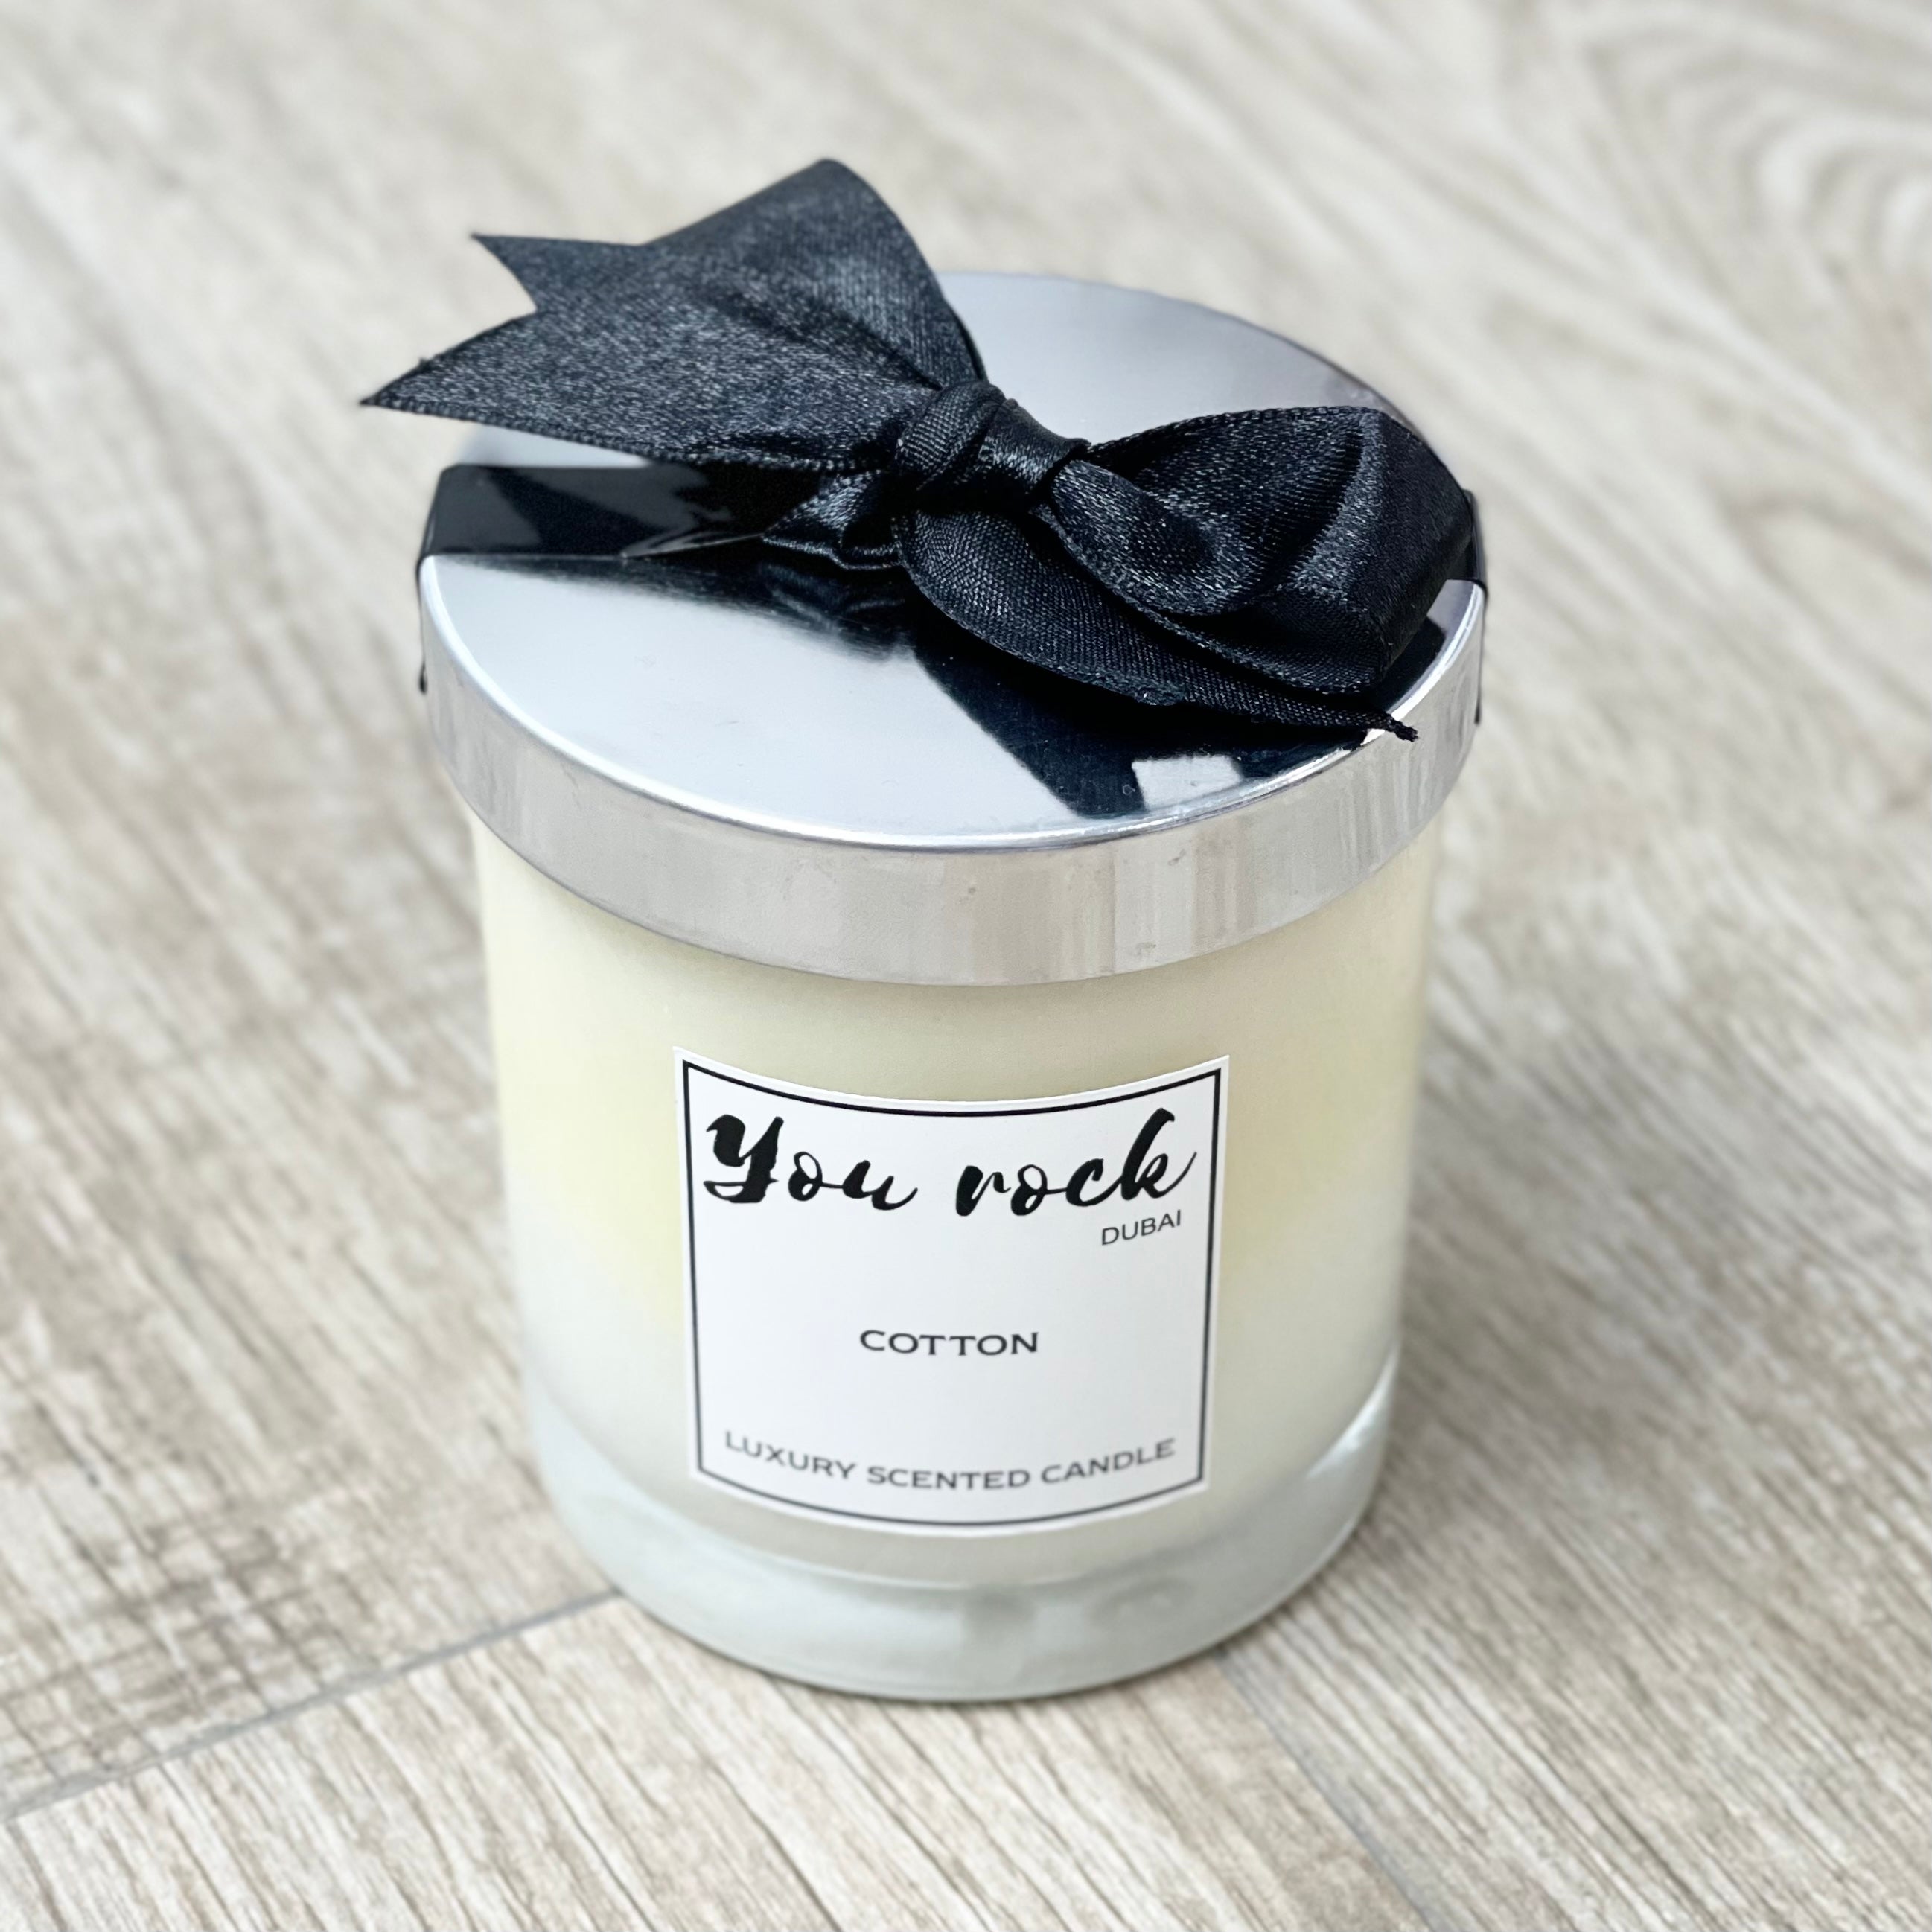 Natural Soy Wax Scented Candle - Cotton Fragrance 